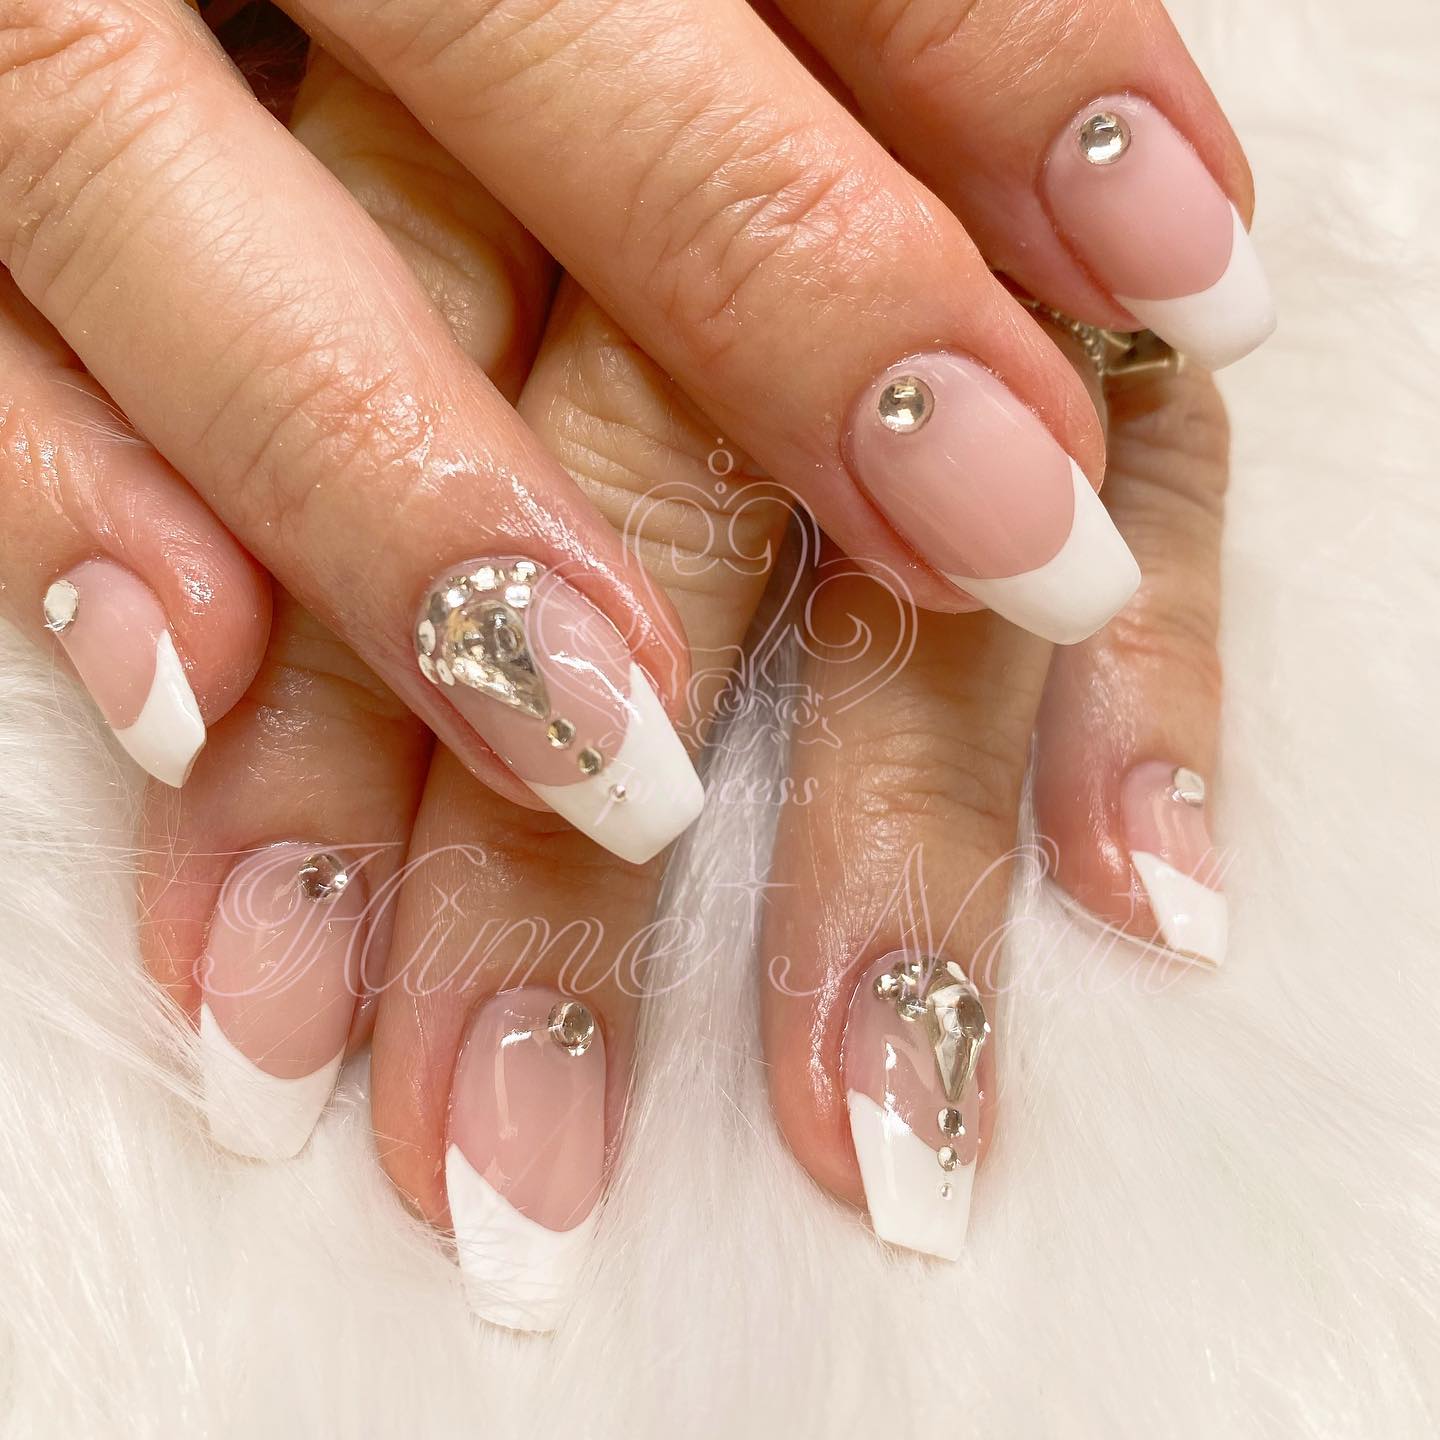 You deserve the best as a bride, so your nails should shine bright like a diamond. In order to get that look, stick shiny gems on your fresh French mani. As accent nails, your ring nails can be more decorated than the others.